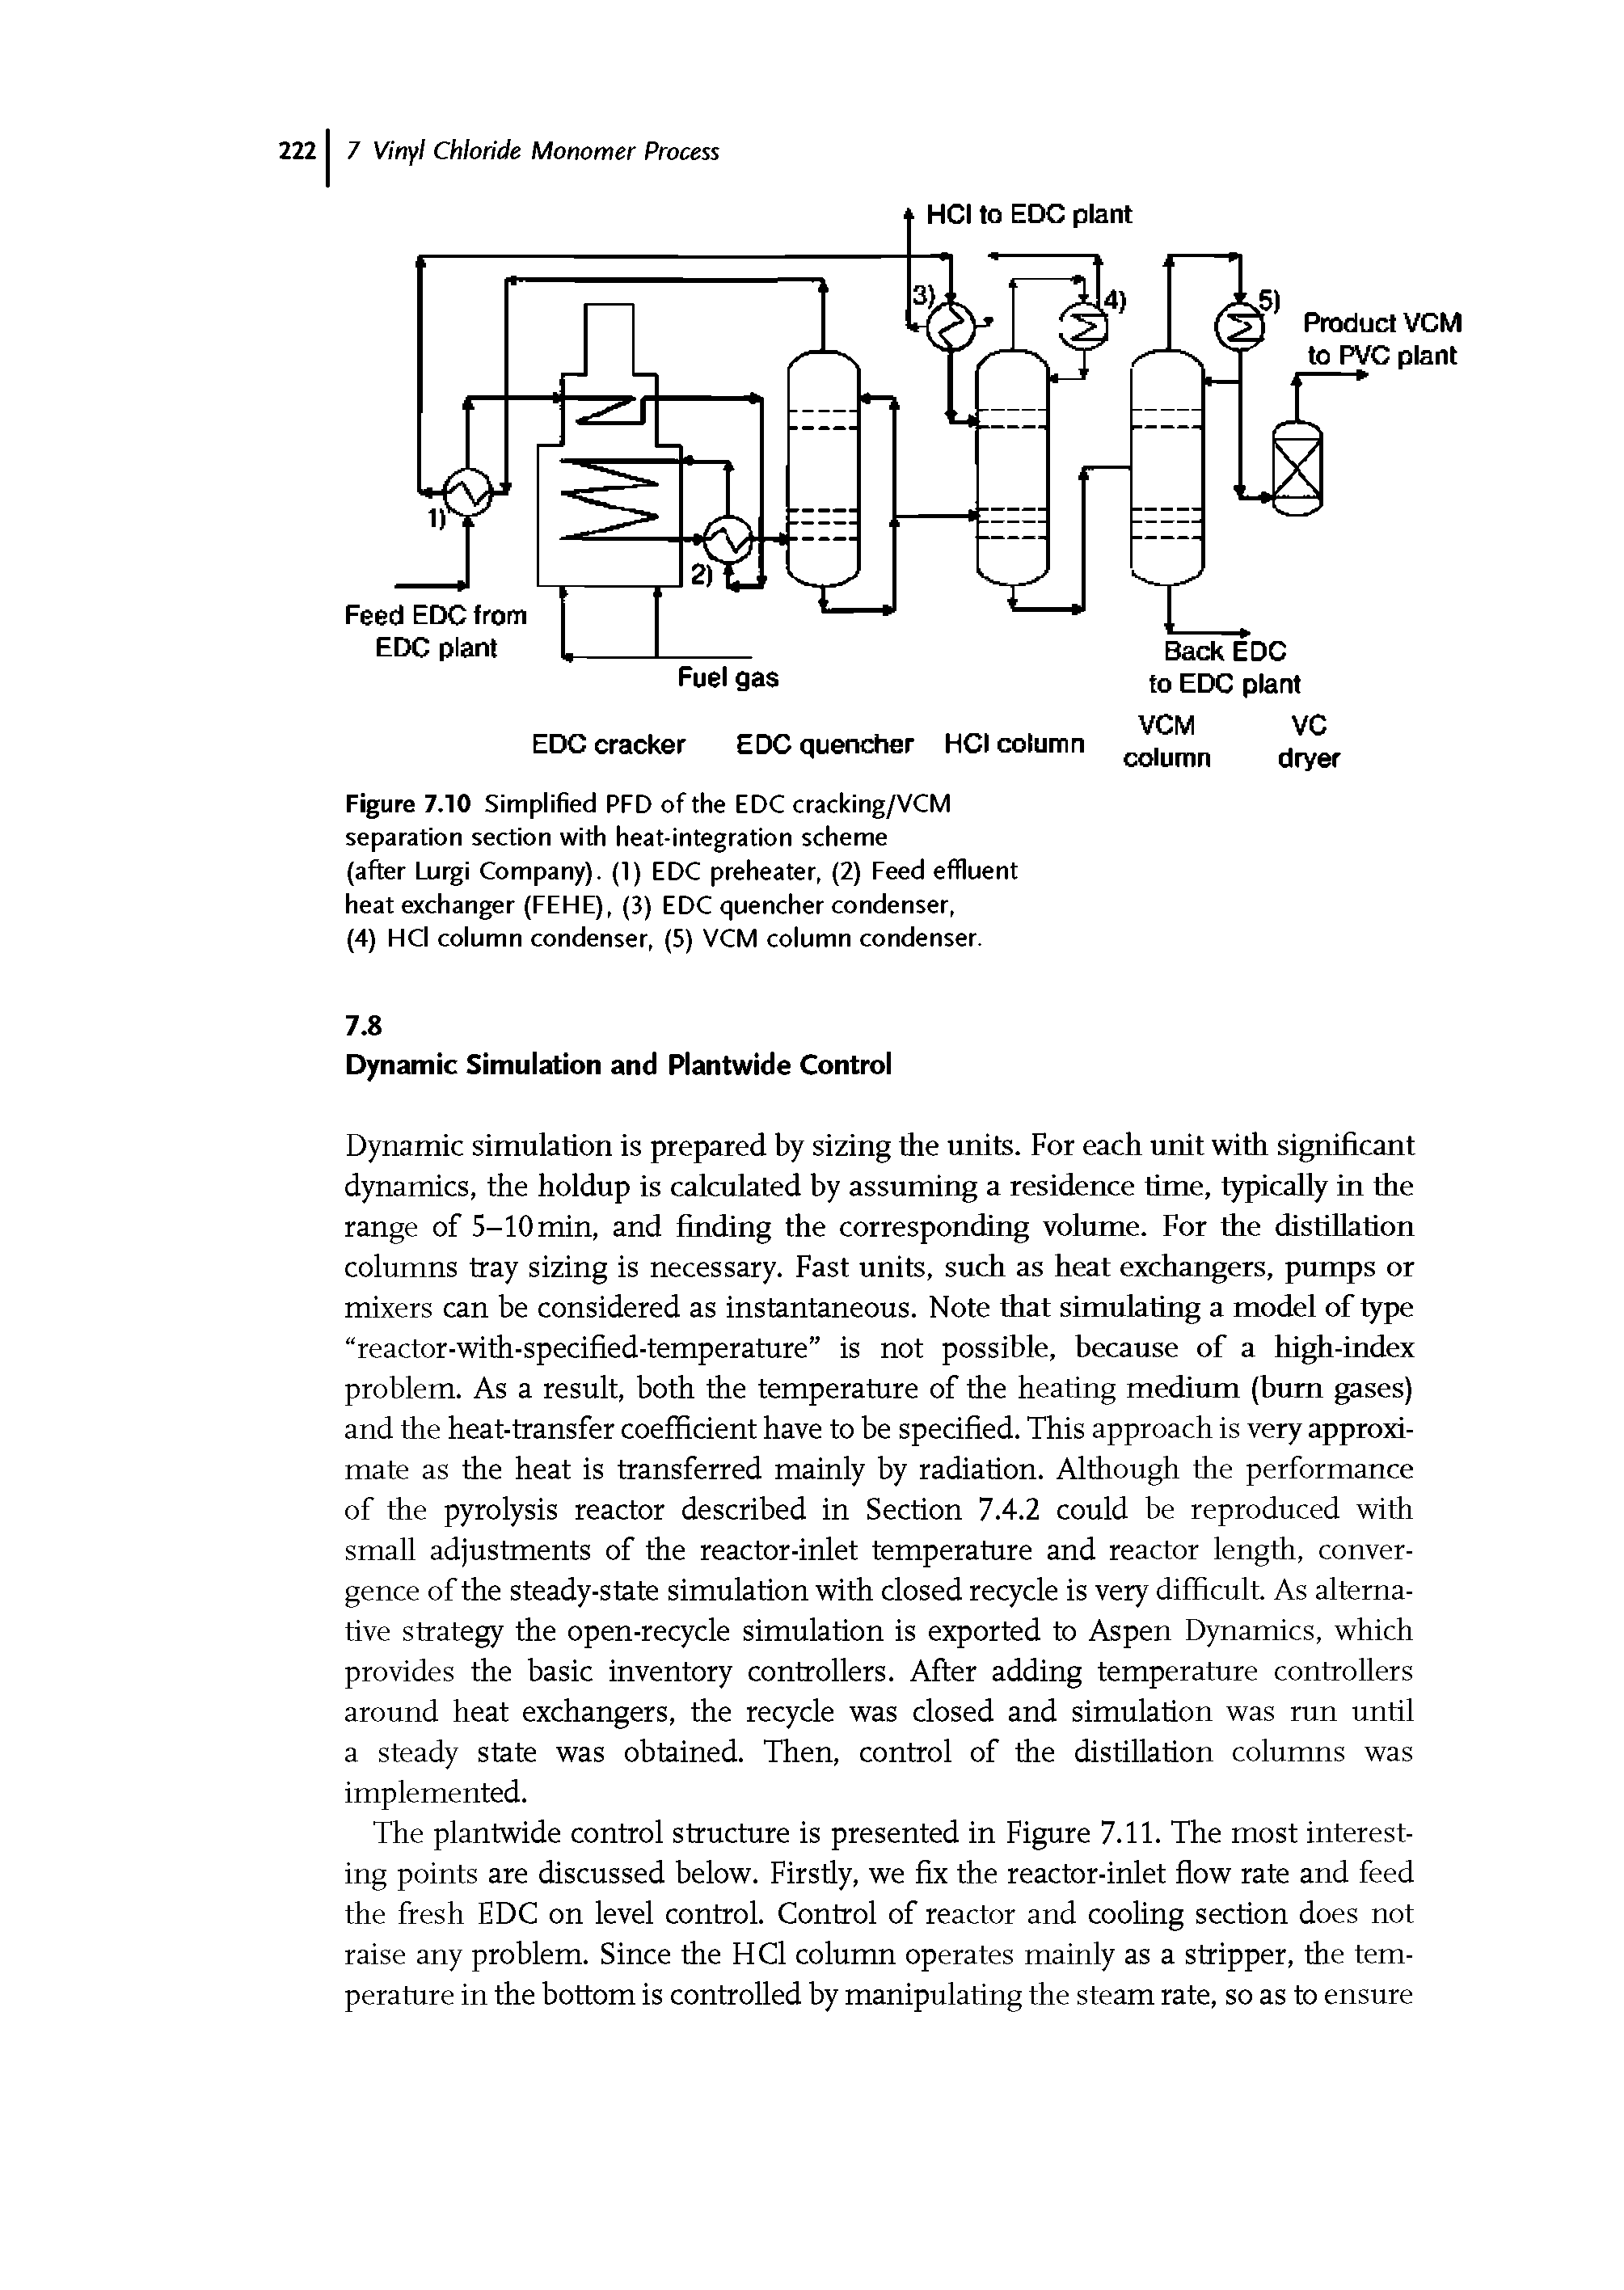 Figure 7.10 Simplified PFD of the EDC cracking/VCM separation section with heat-integration scheme (after Lurgi Company). (1) EDC preheater, (2) Feed effluent heat exchanger (FEHE), (3) EDC quencher condenser,...